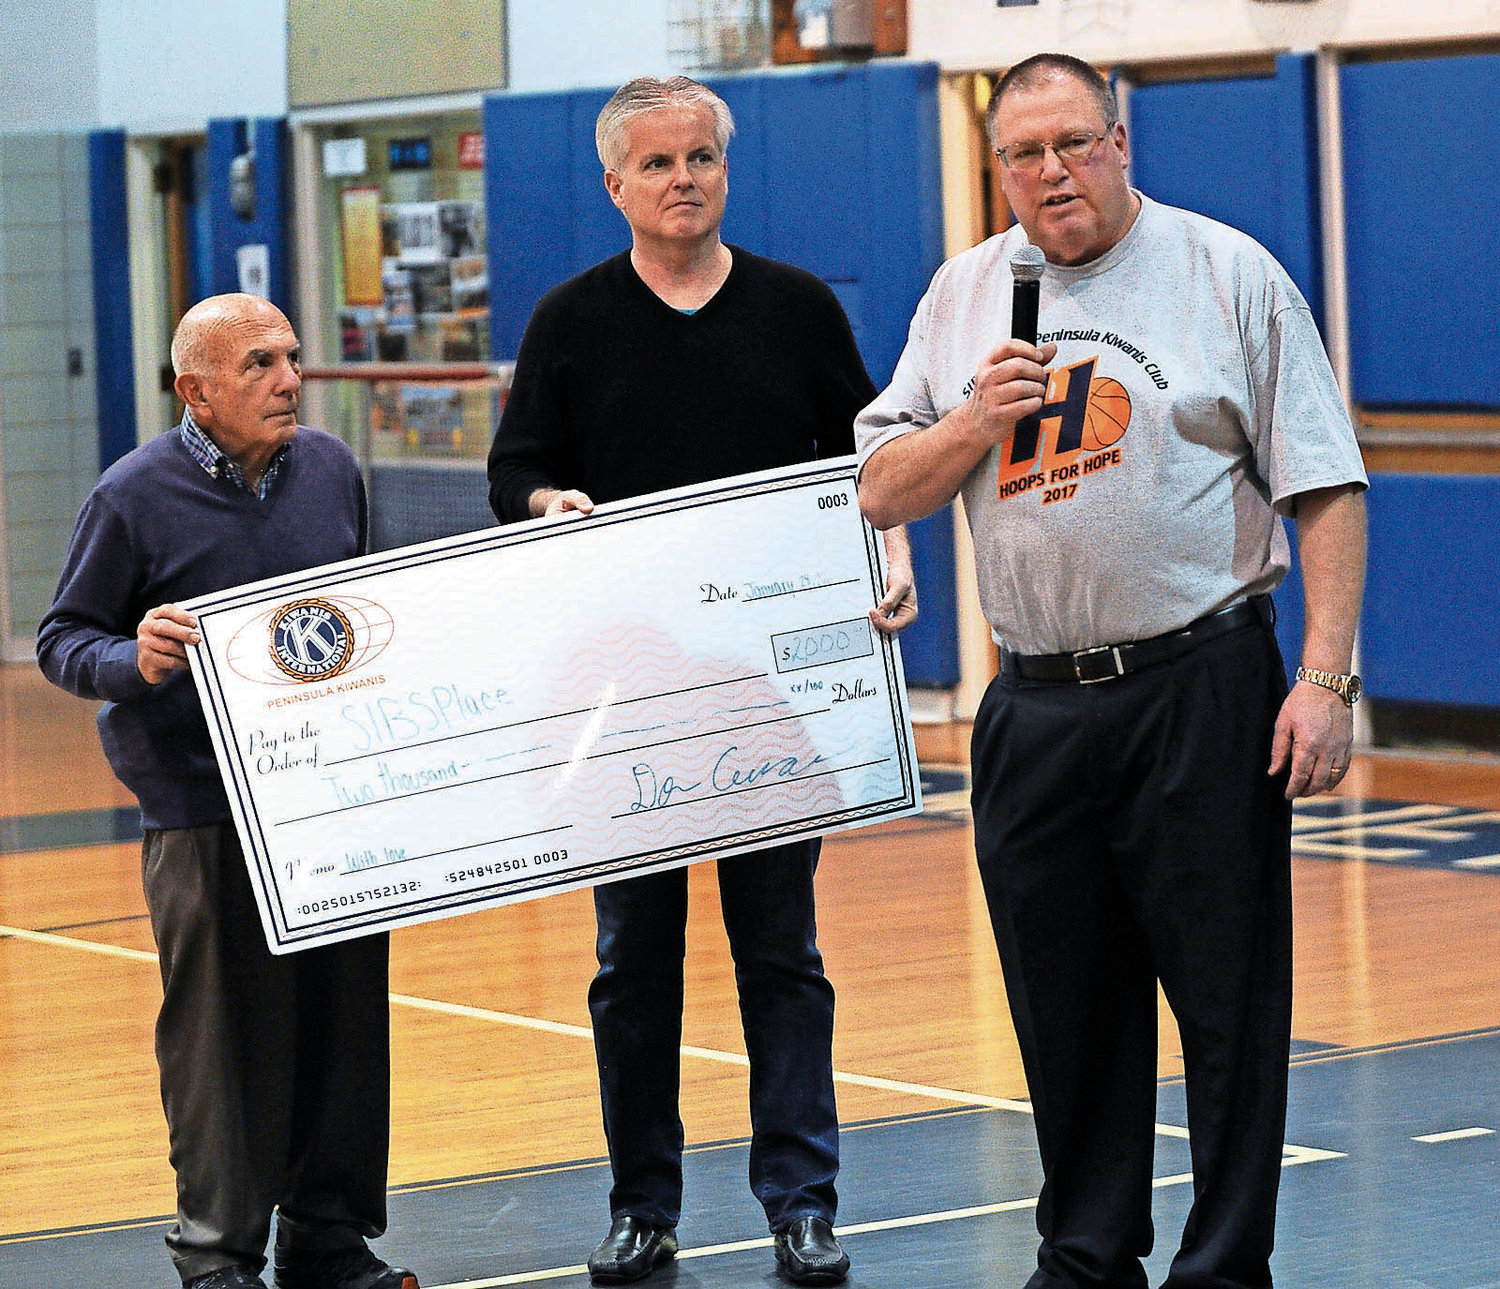 Through its Hoops for Hope game on Feb. 9, the Hewlett High School varsity basketball teams aims to raise $15,000 for its programs and SIBSPlace. At the 2017 game, SIBSPlace founder Michael Schamroth, left, Peninsula Kiwanis member Chris McGrath and Hewlett boys’ basketball coach Bill Dubin.